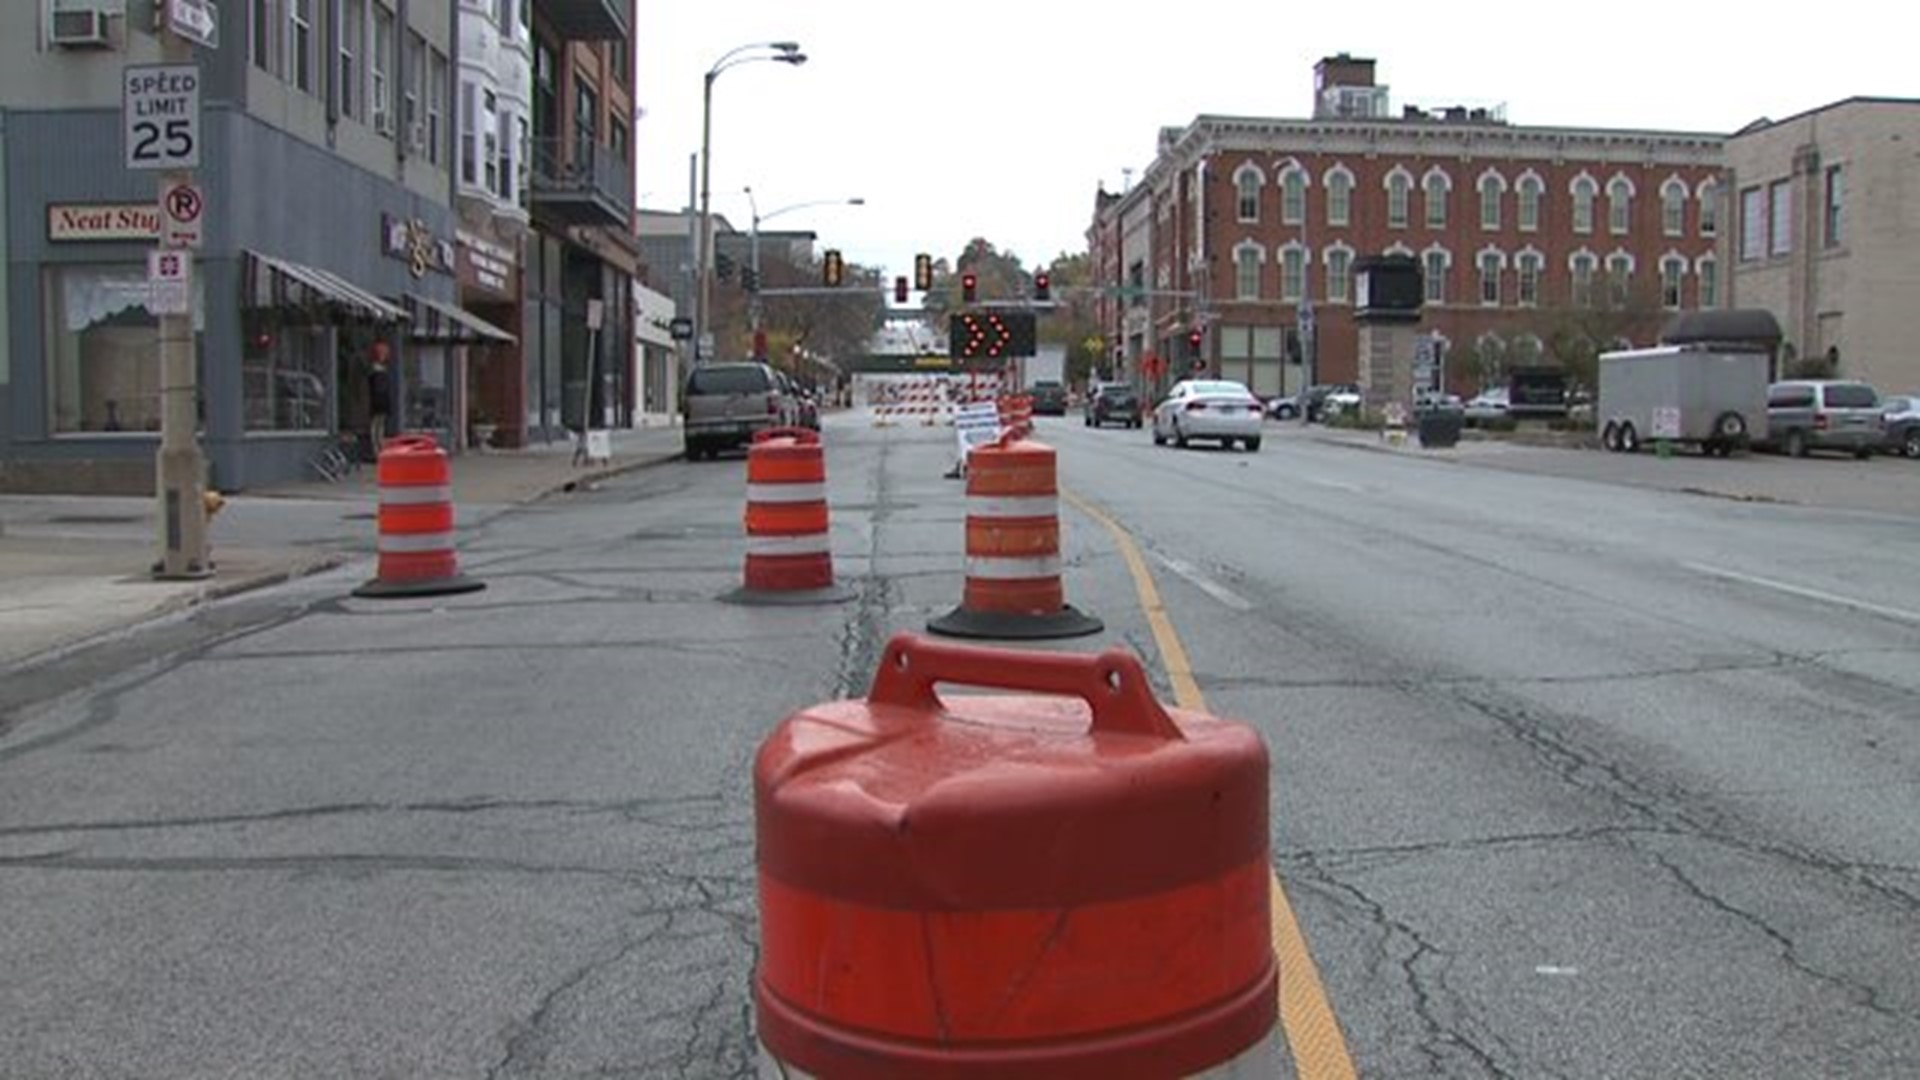 Brady Street business hurting from traffic detours